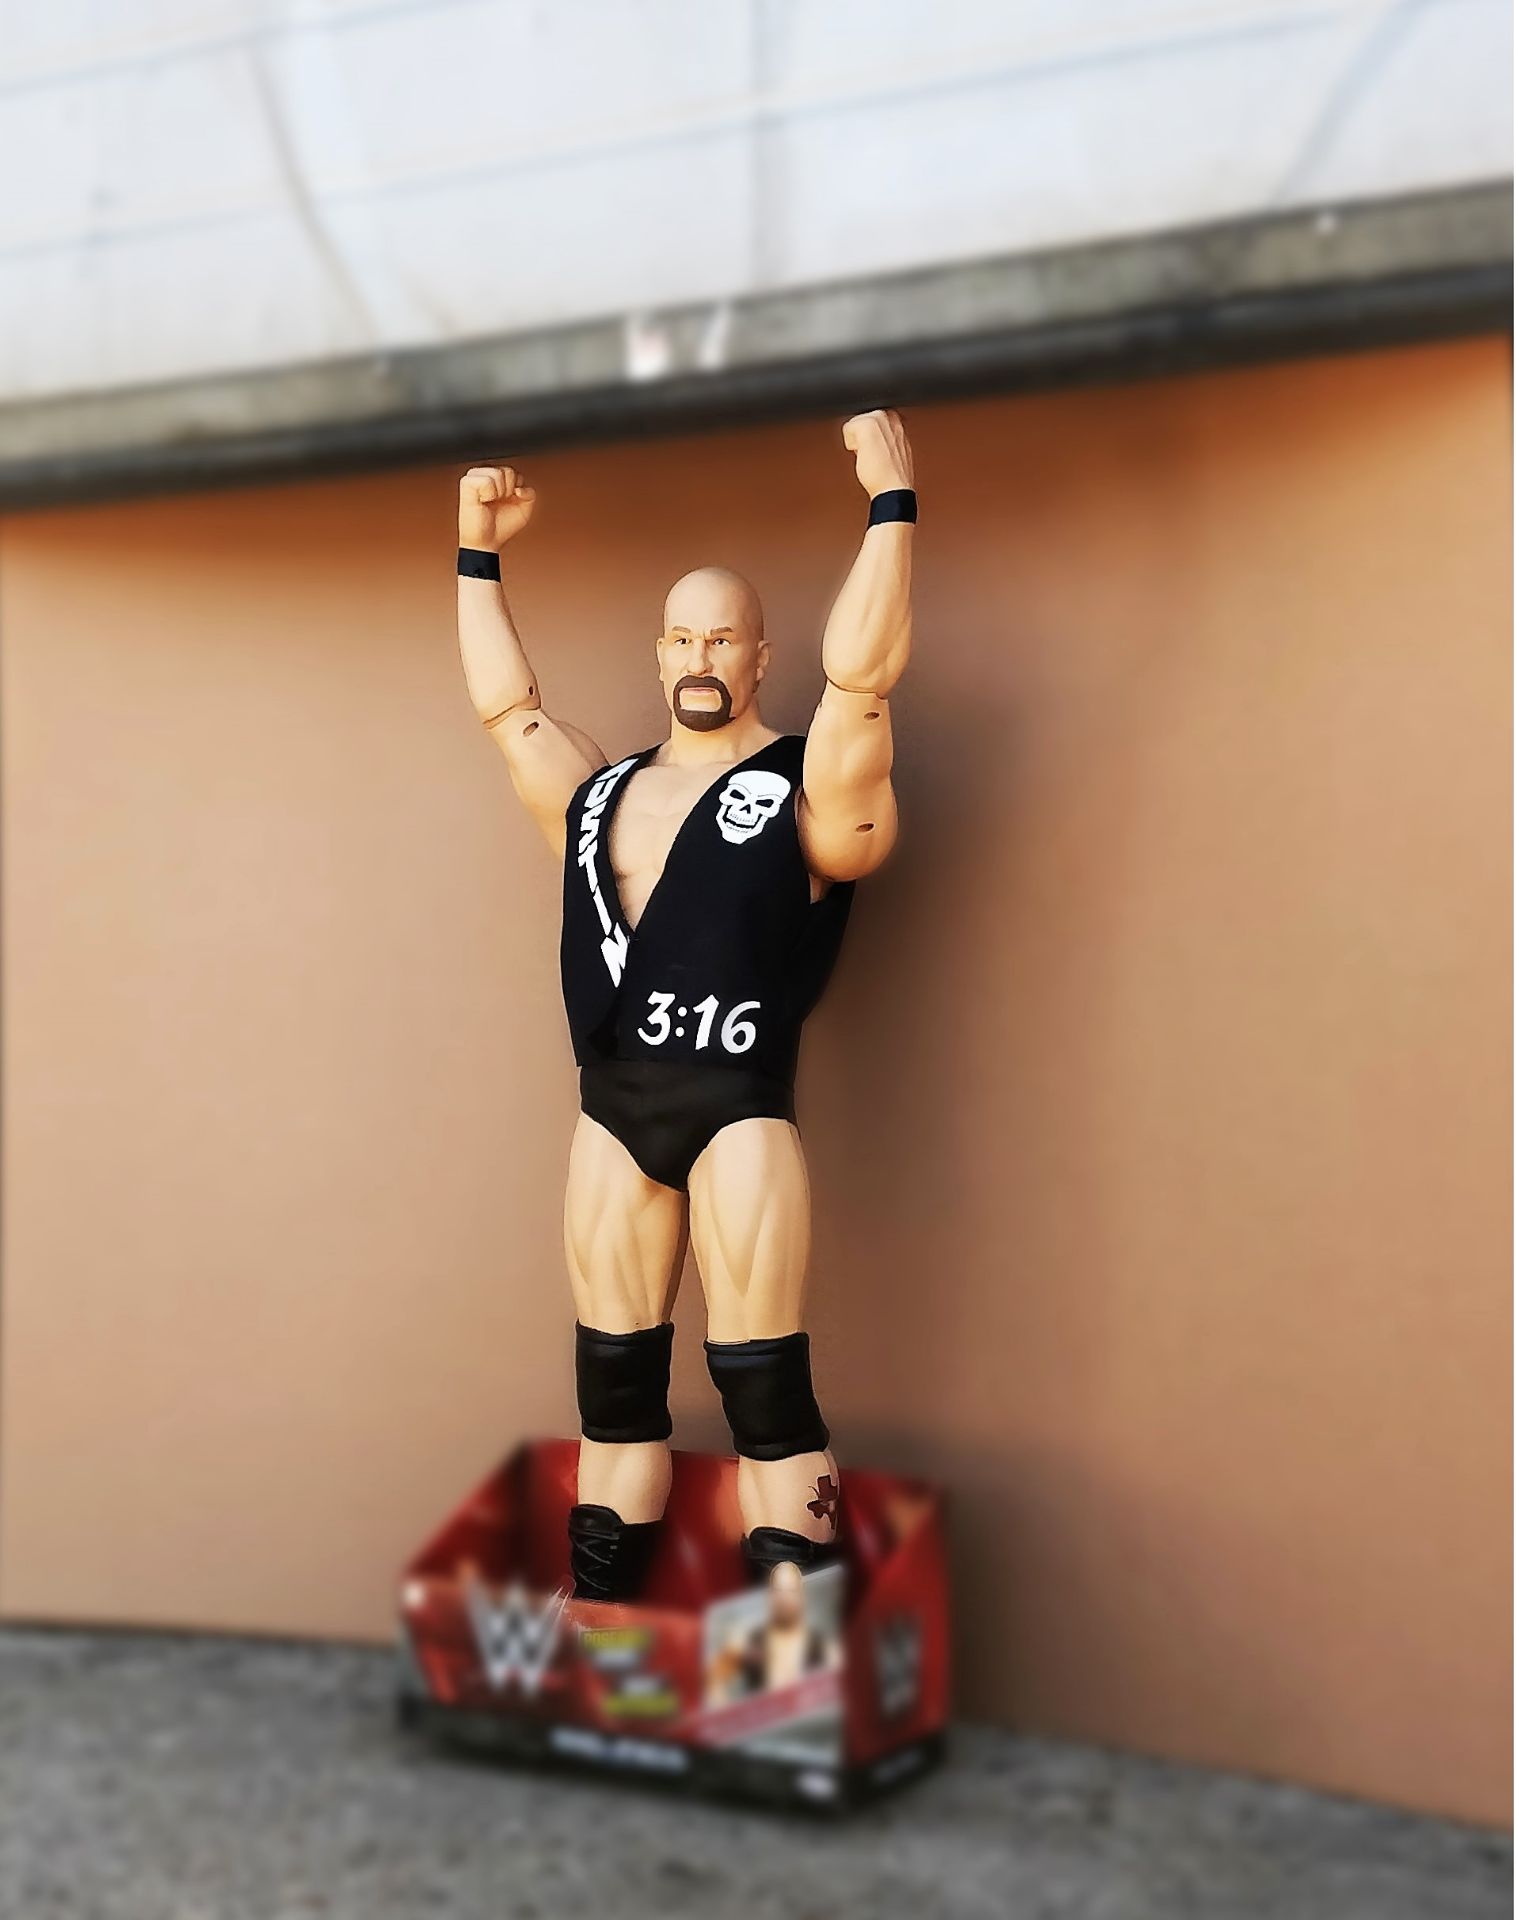 V Brand New Massive 31" WWE Stone Cold Steve Austin Action Figures - 3count.co.uk Price £28.99 - 8 - Image 7 of 8